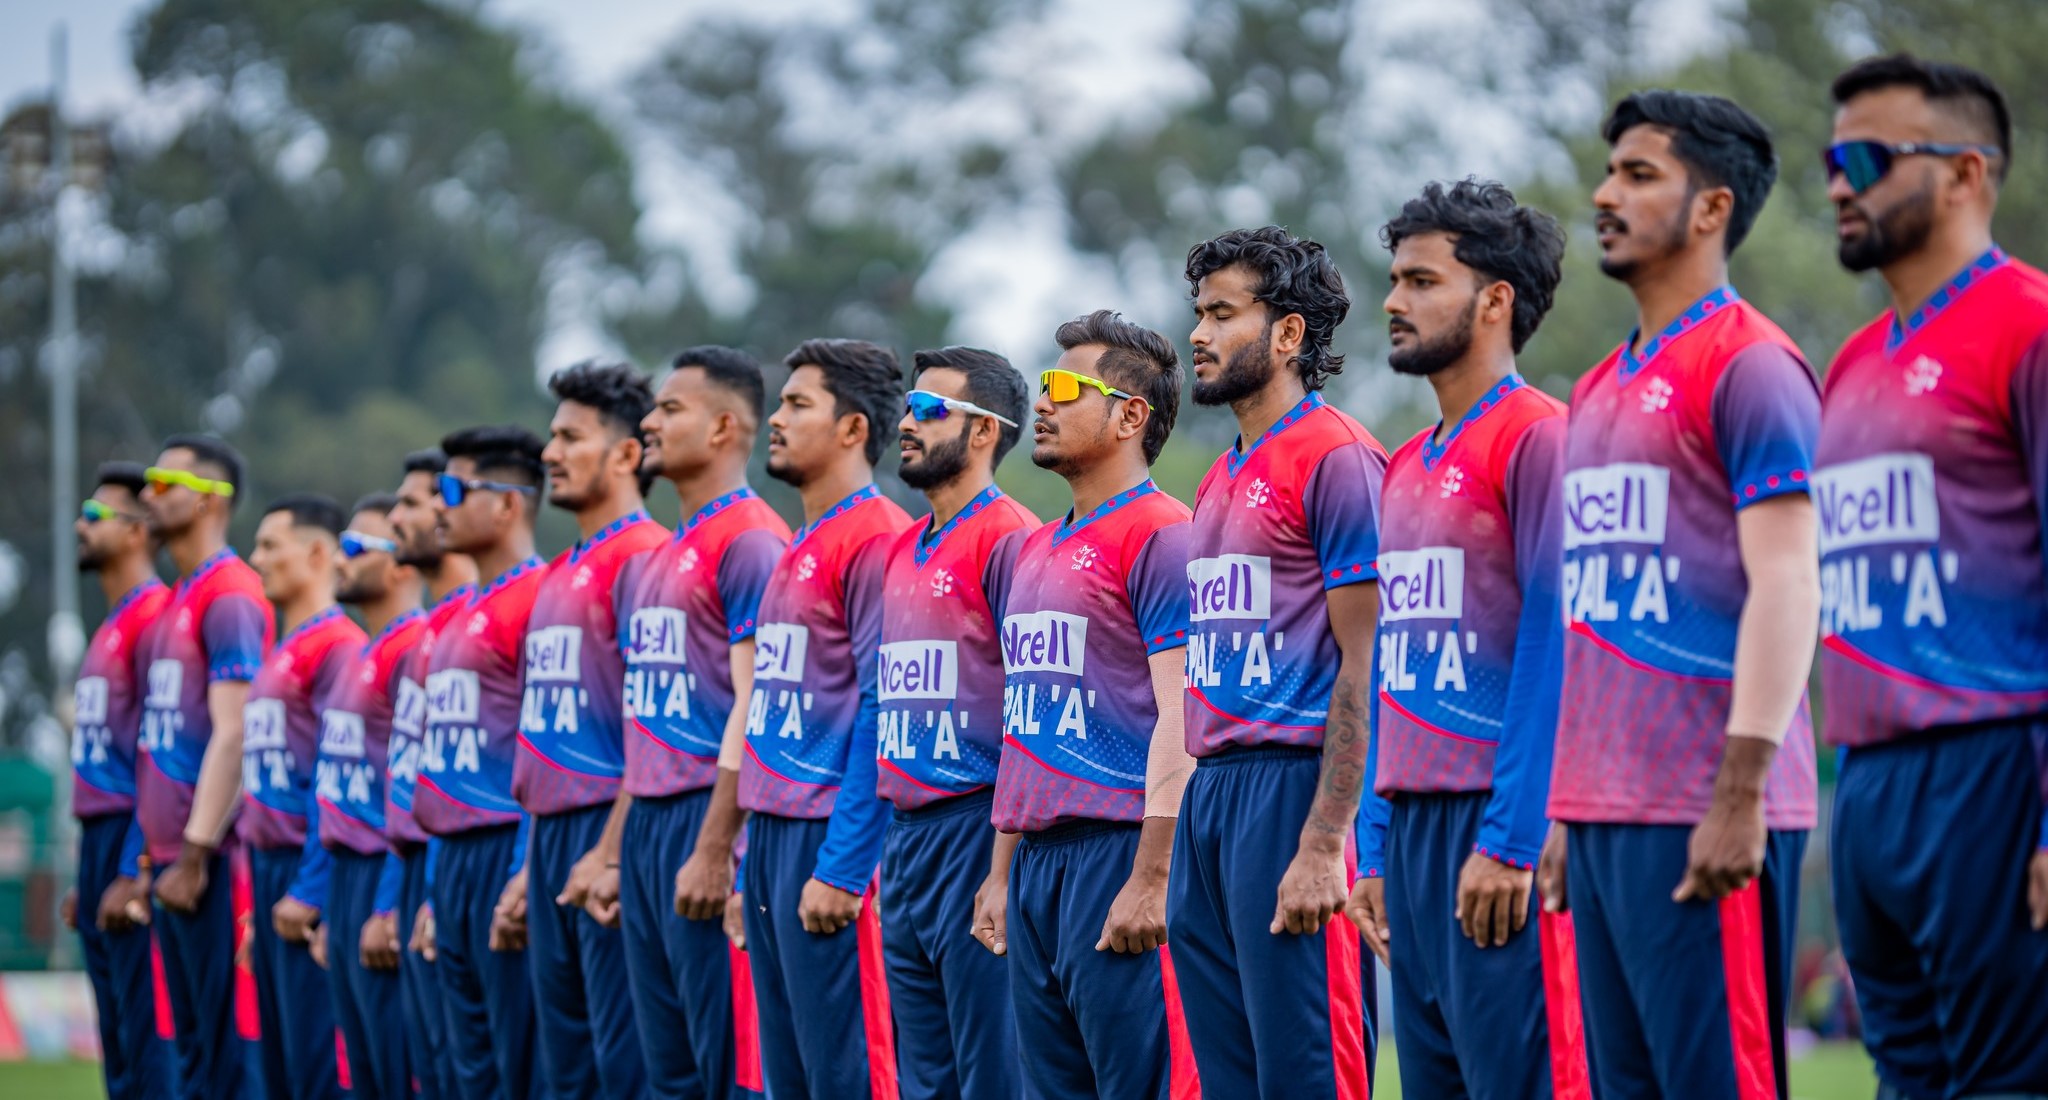 Nepal A vs. Ireland Wolves one-day series begins today